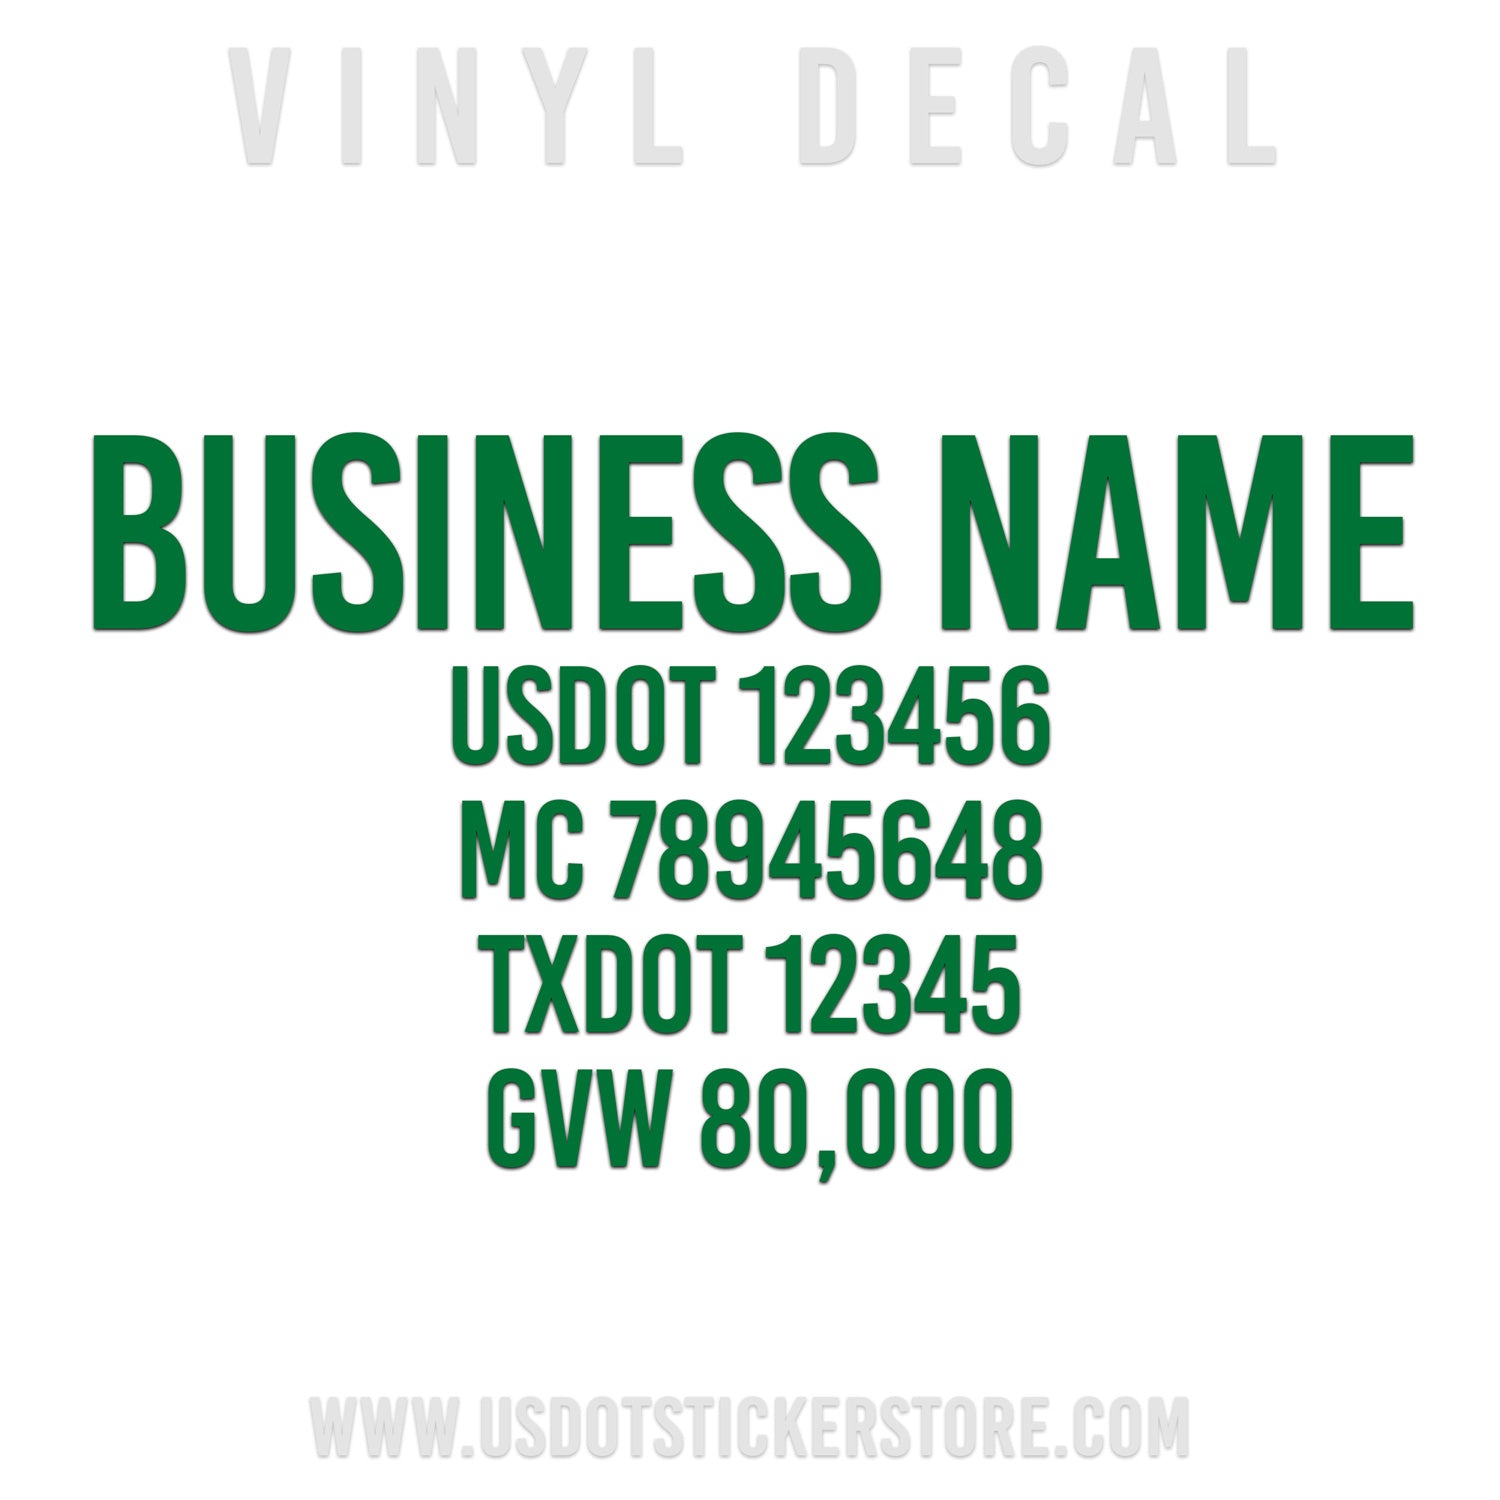 business name decal with regulation numbers